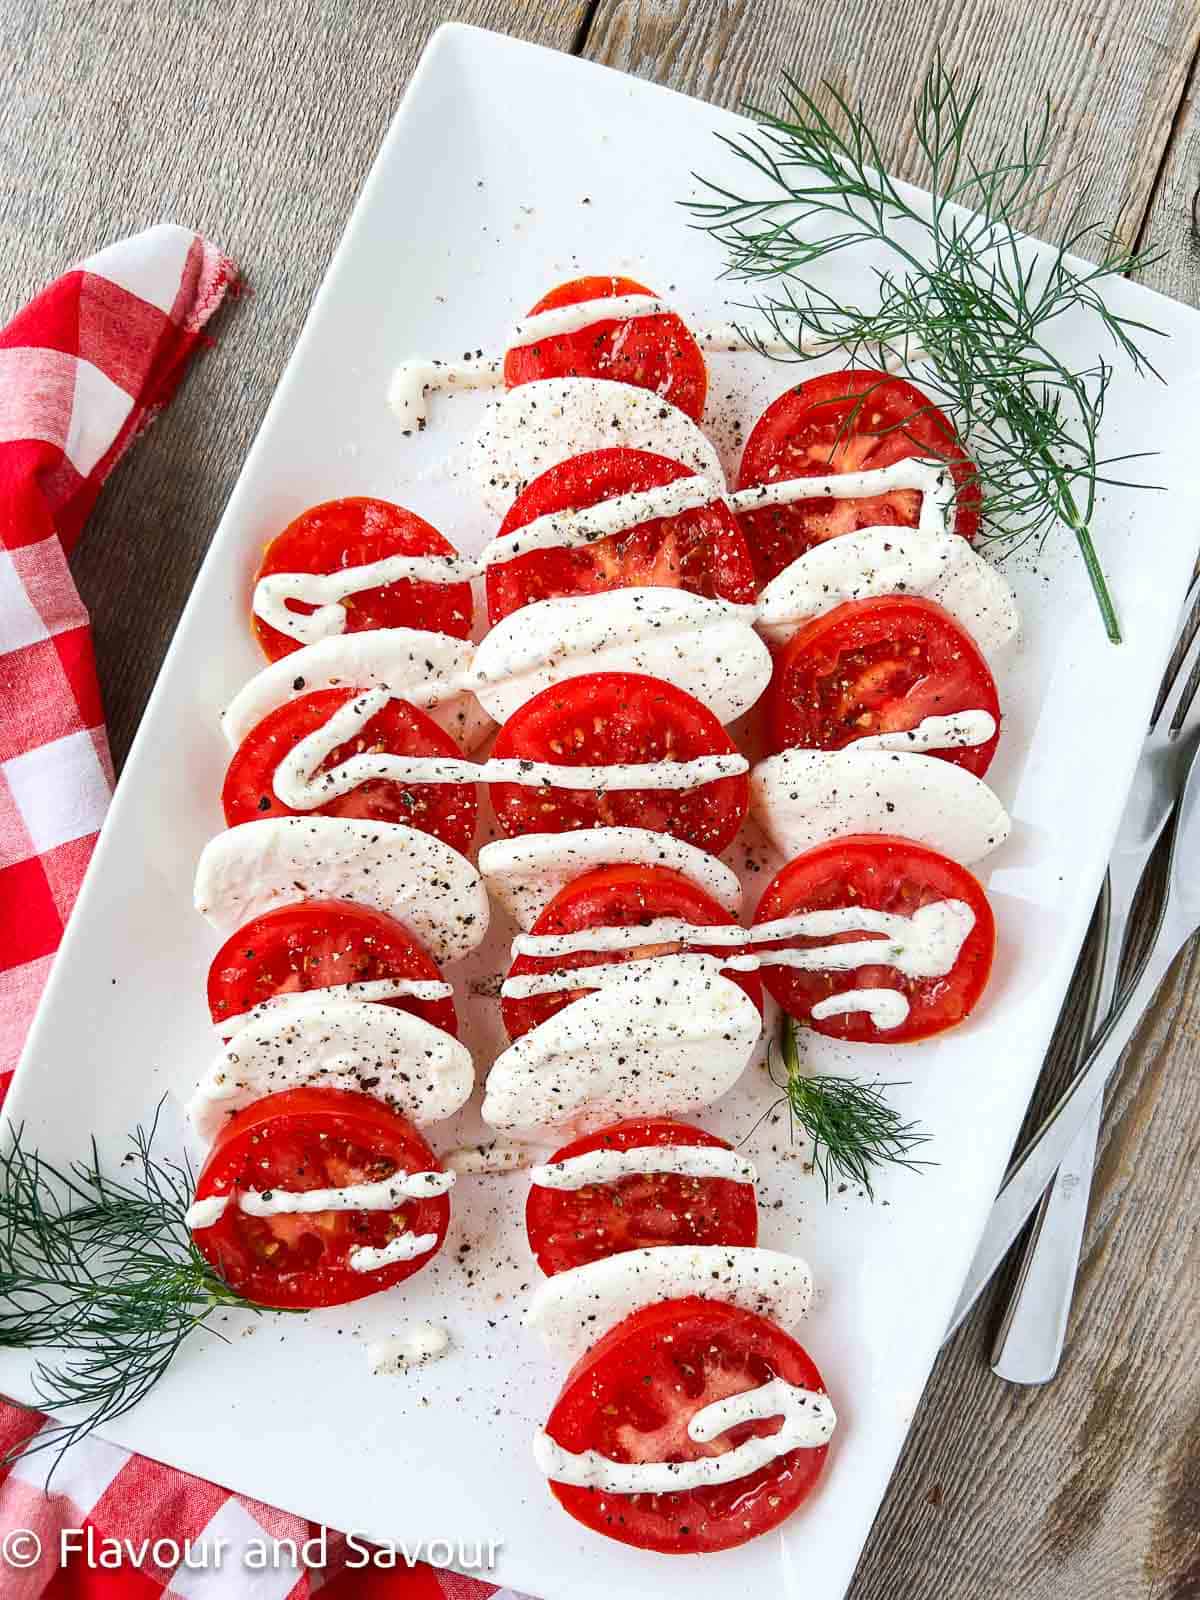 Dill Caprese Salad on a platter sprinkled with freshly ground black pepper and sea salt.